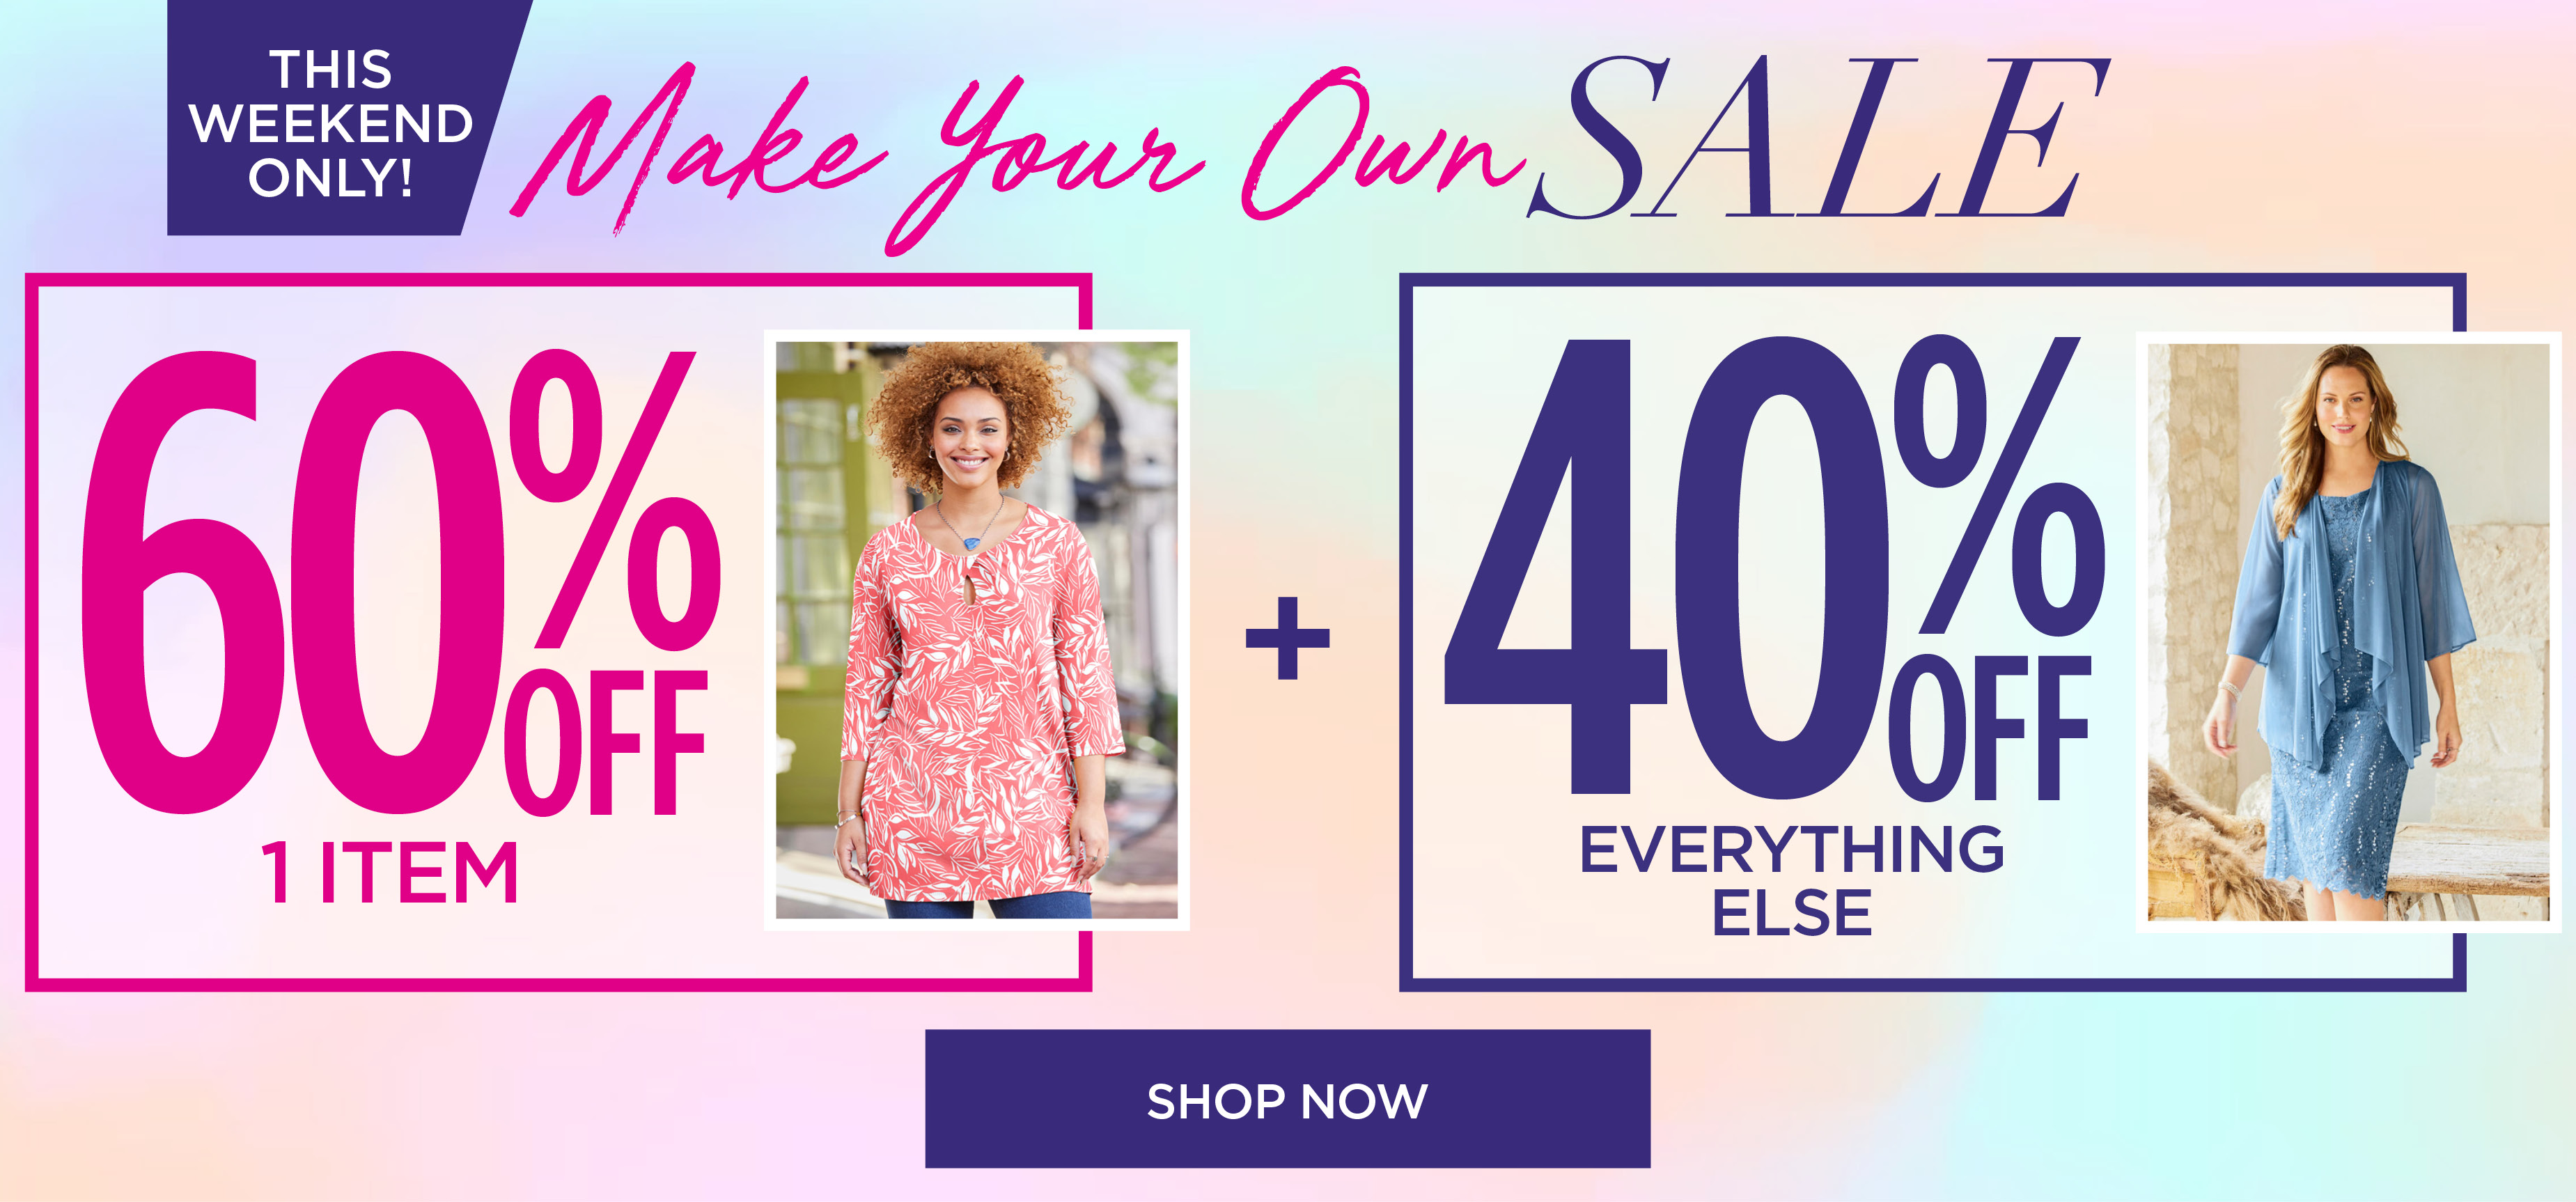 60% OFF 1 ITEM plus 40% OFF EVERYTHING ELSE